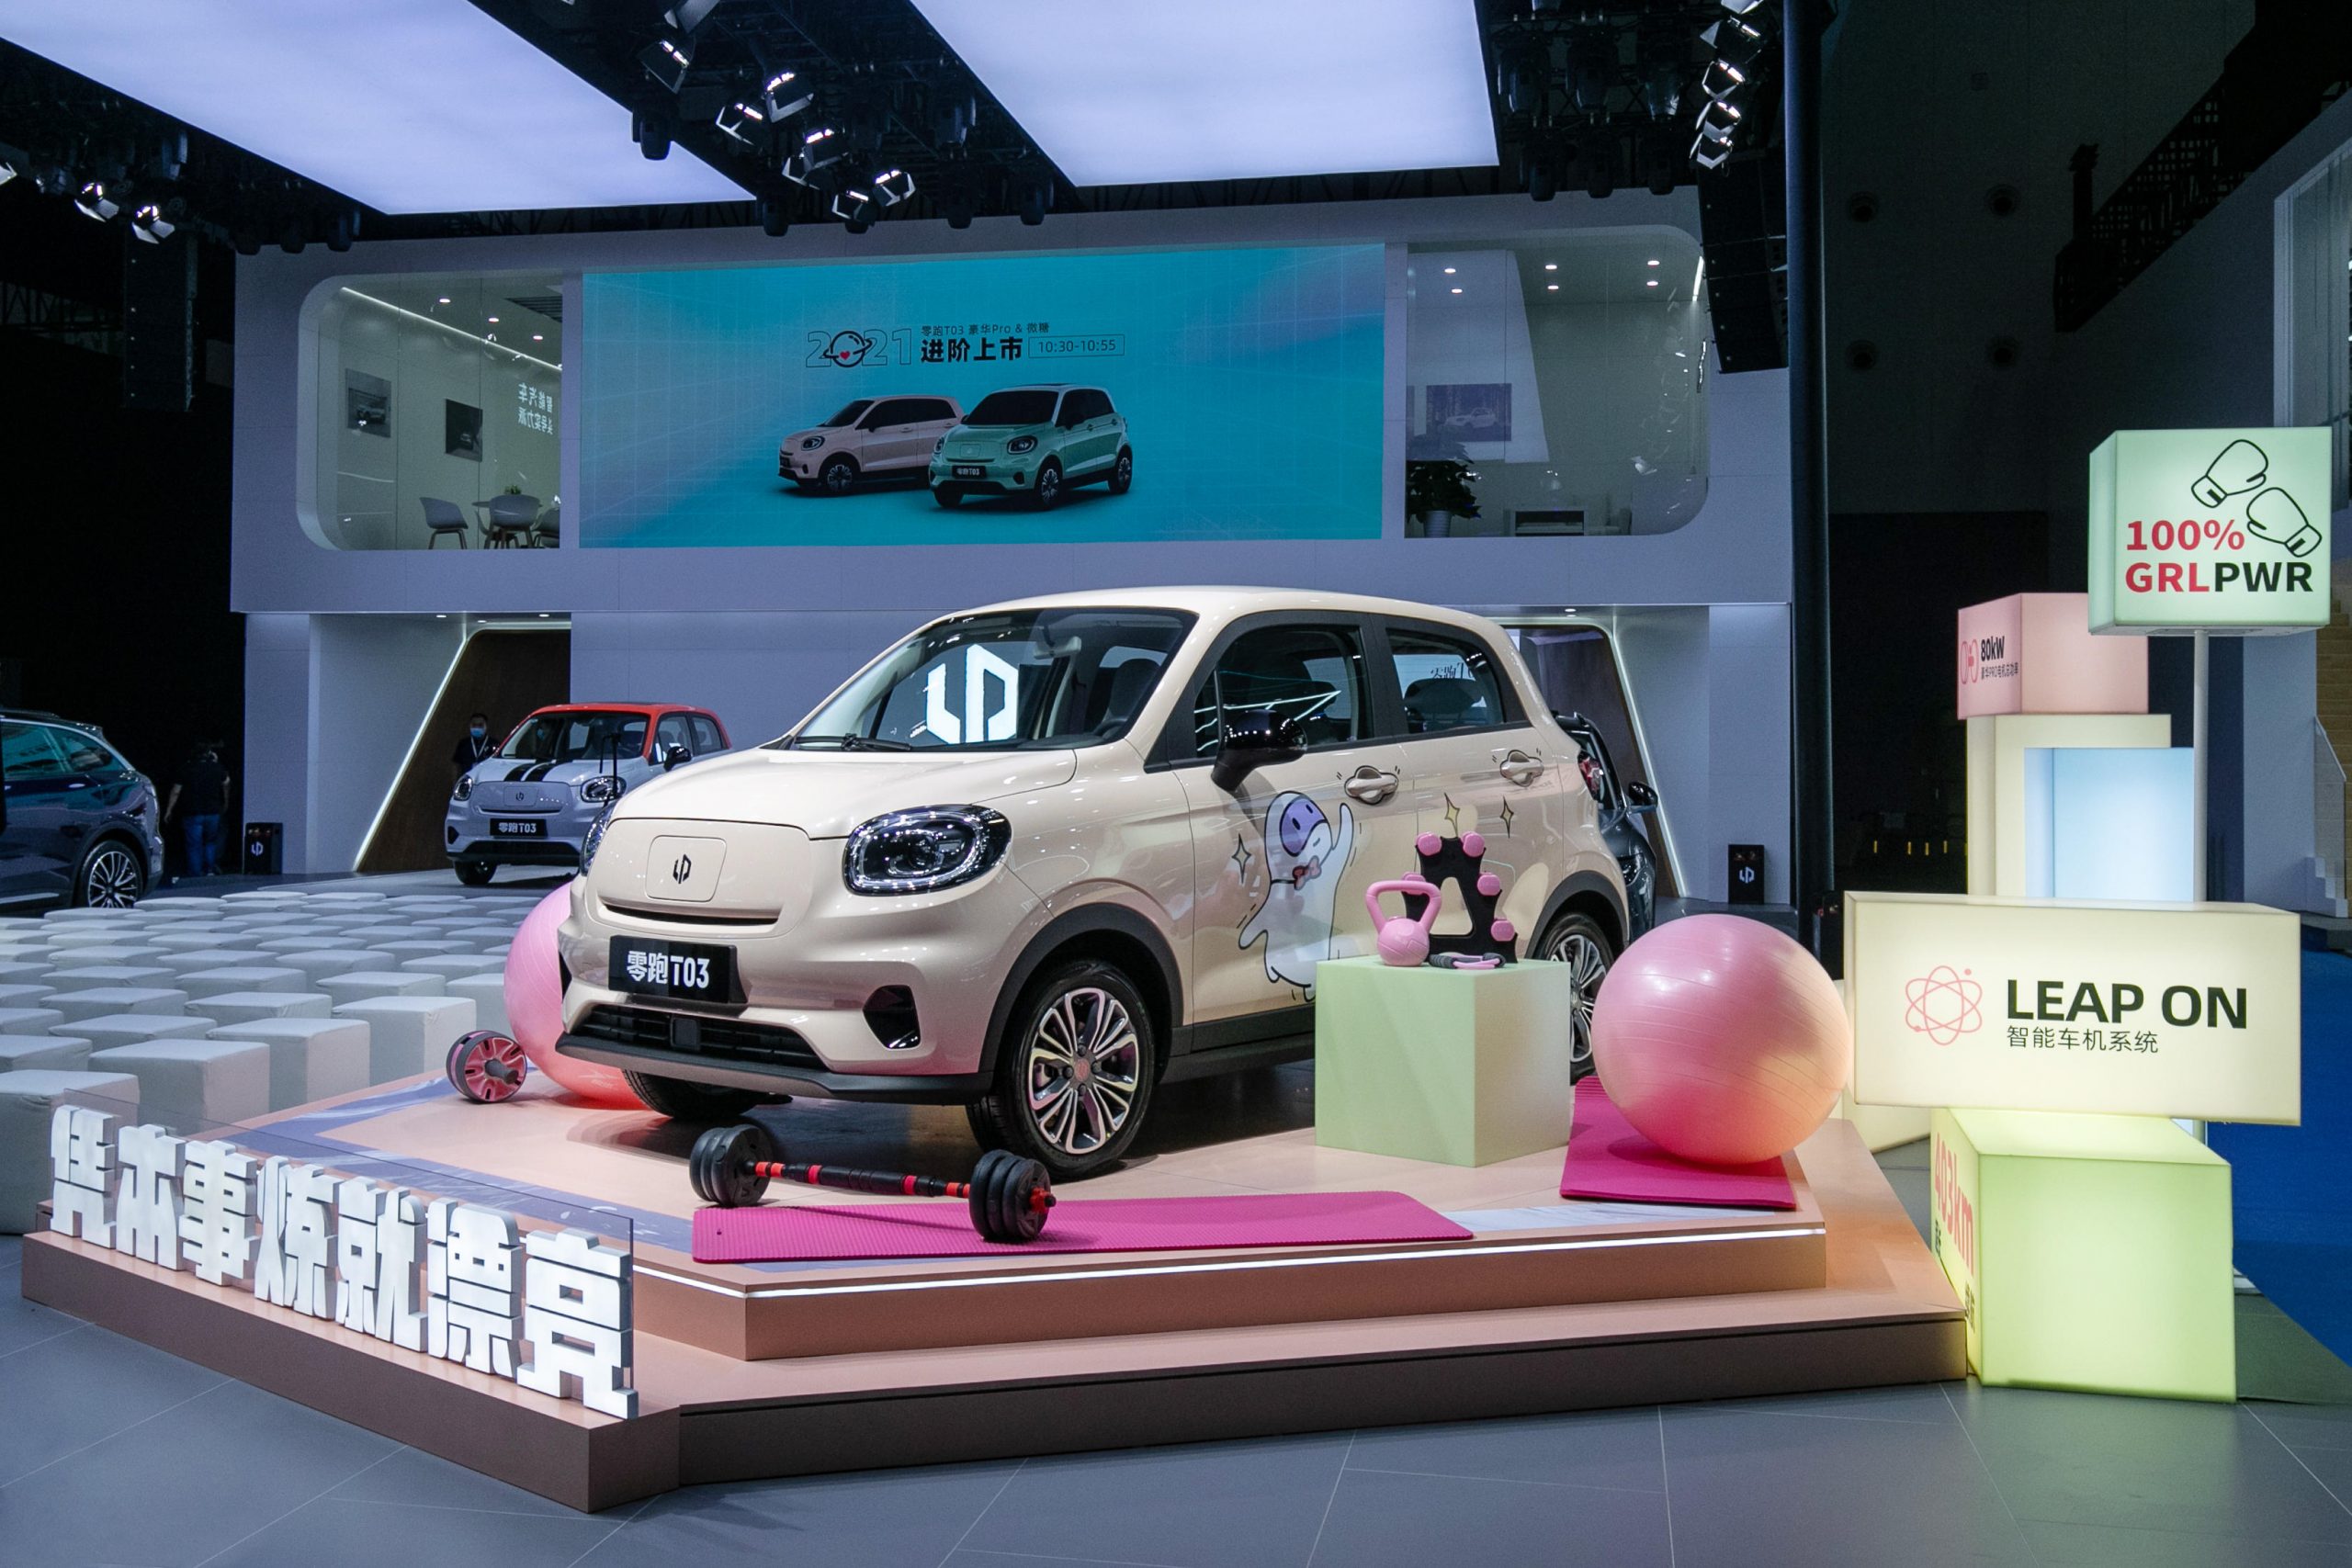 2021 Chengdu Auto Show: ORA T03 Micro Sugar Edition and Luxury Pro Edition launched.